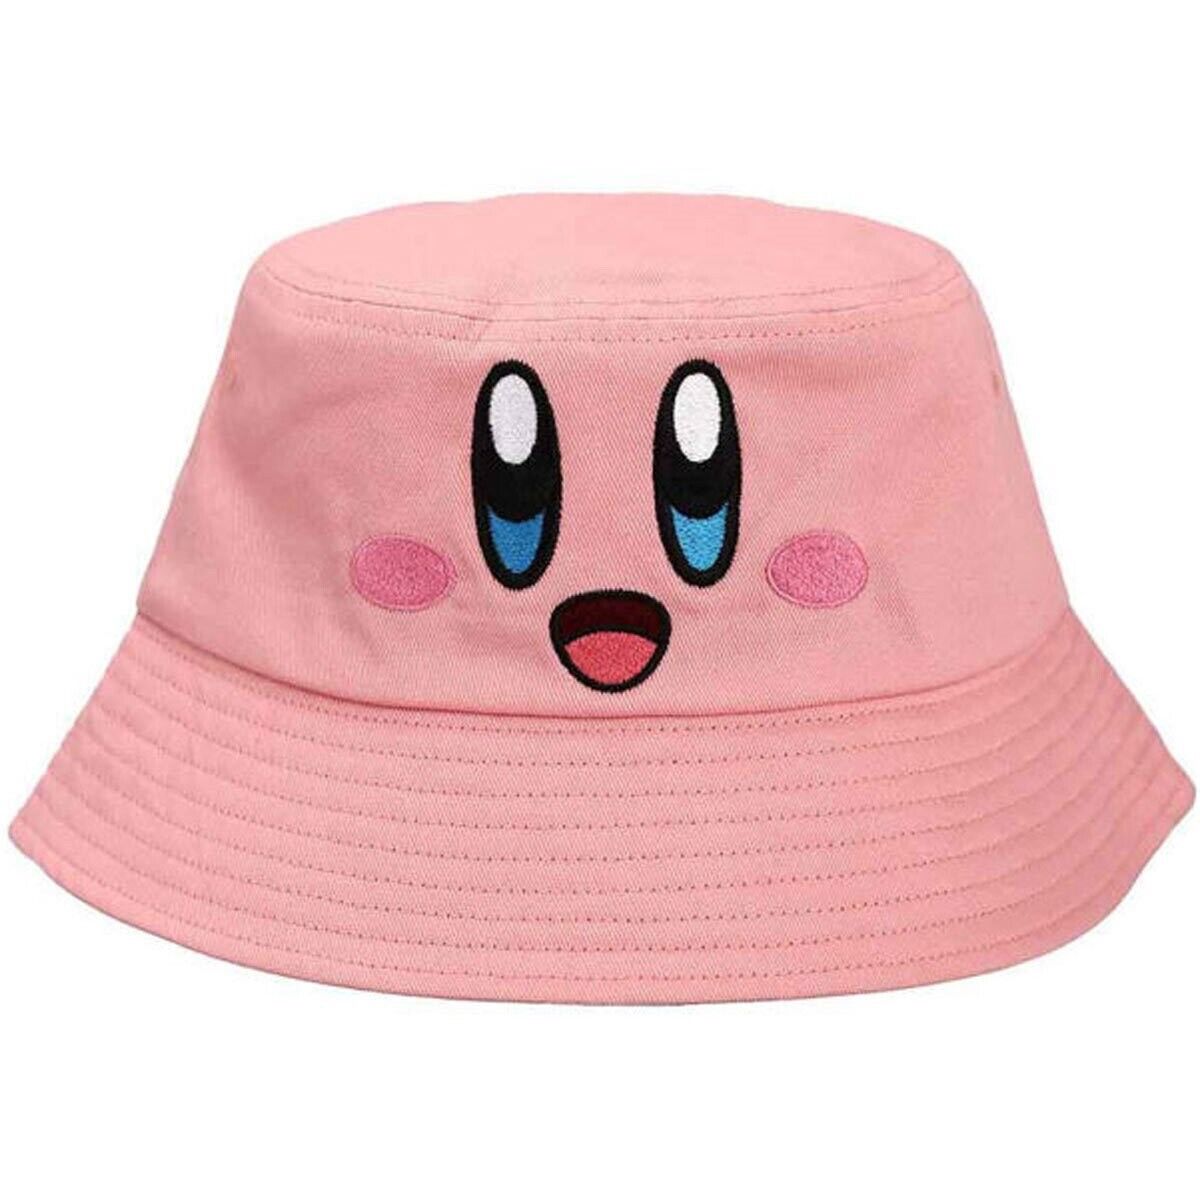 Bioworld • Pink • Embroidered • KIRBY Bucket  Cotton Hat • One Size • Ships Free